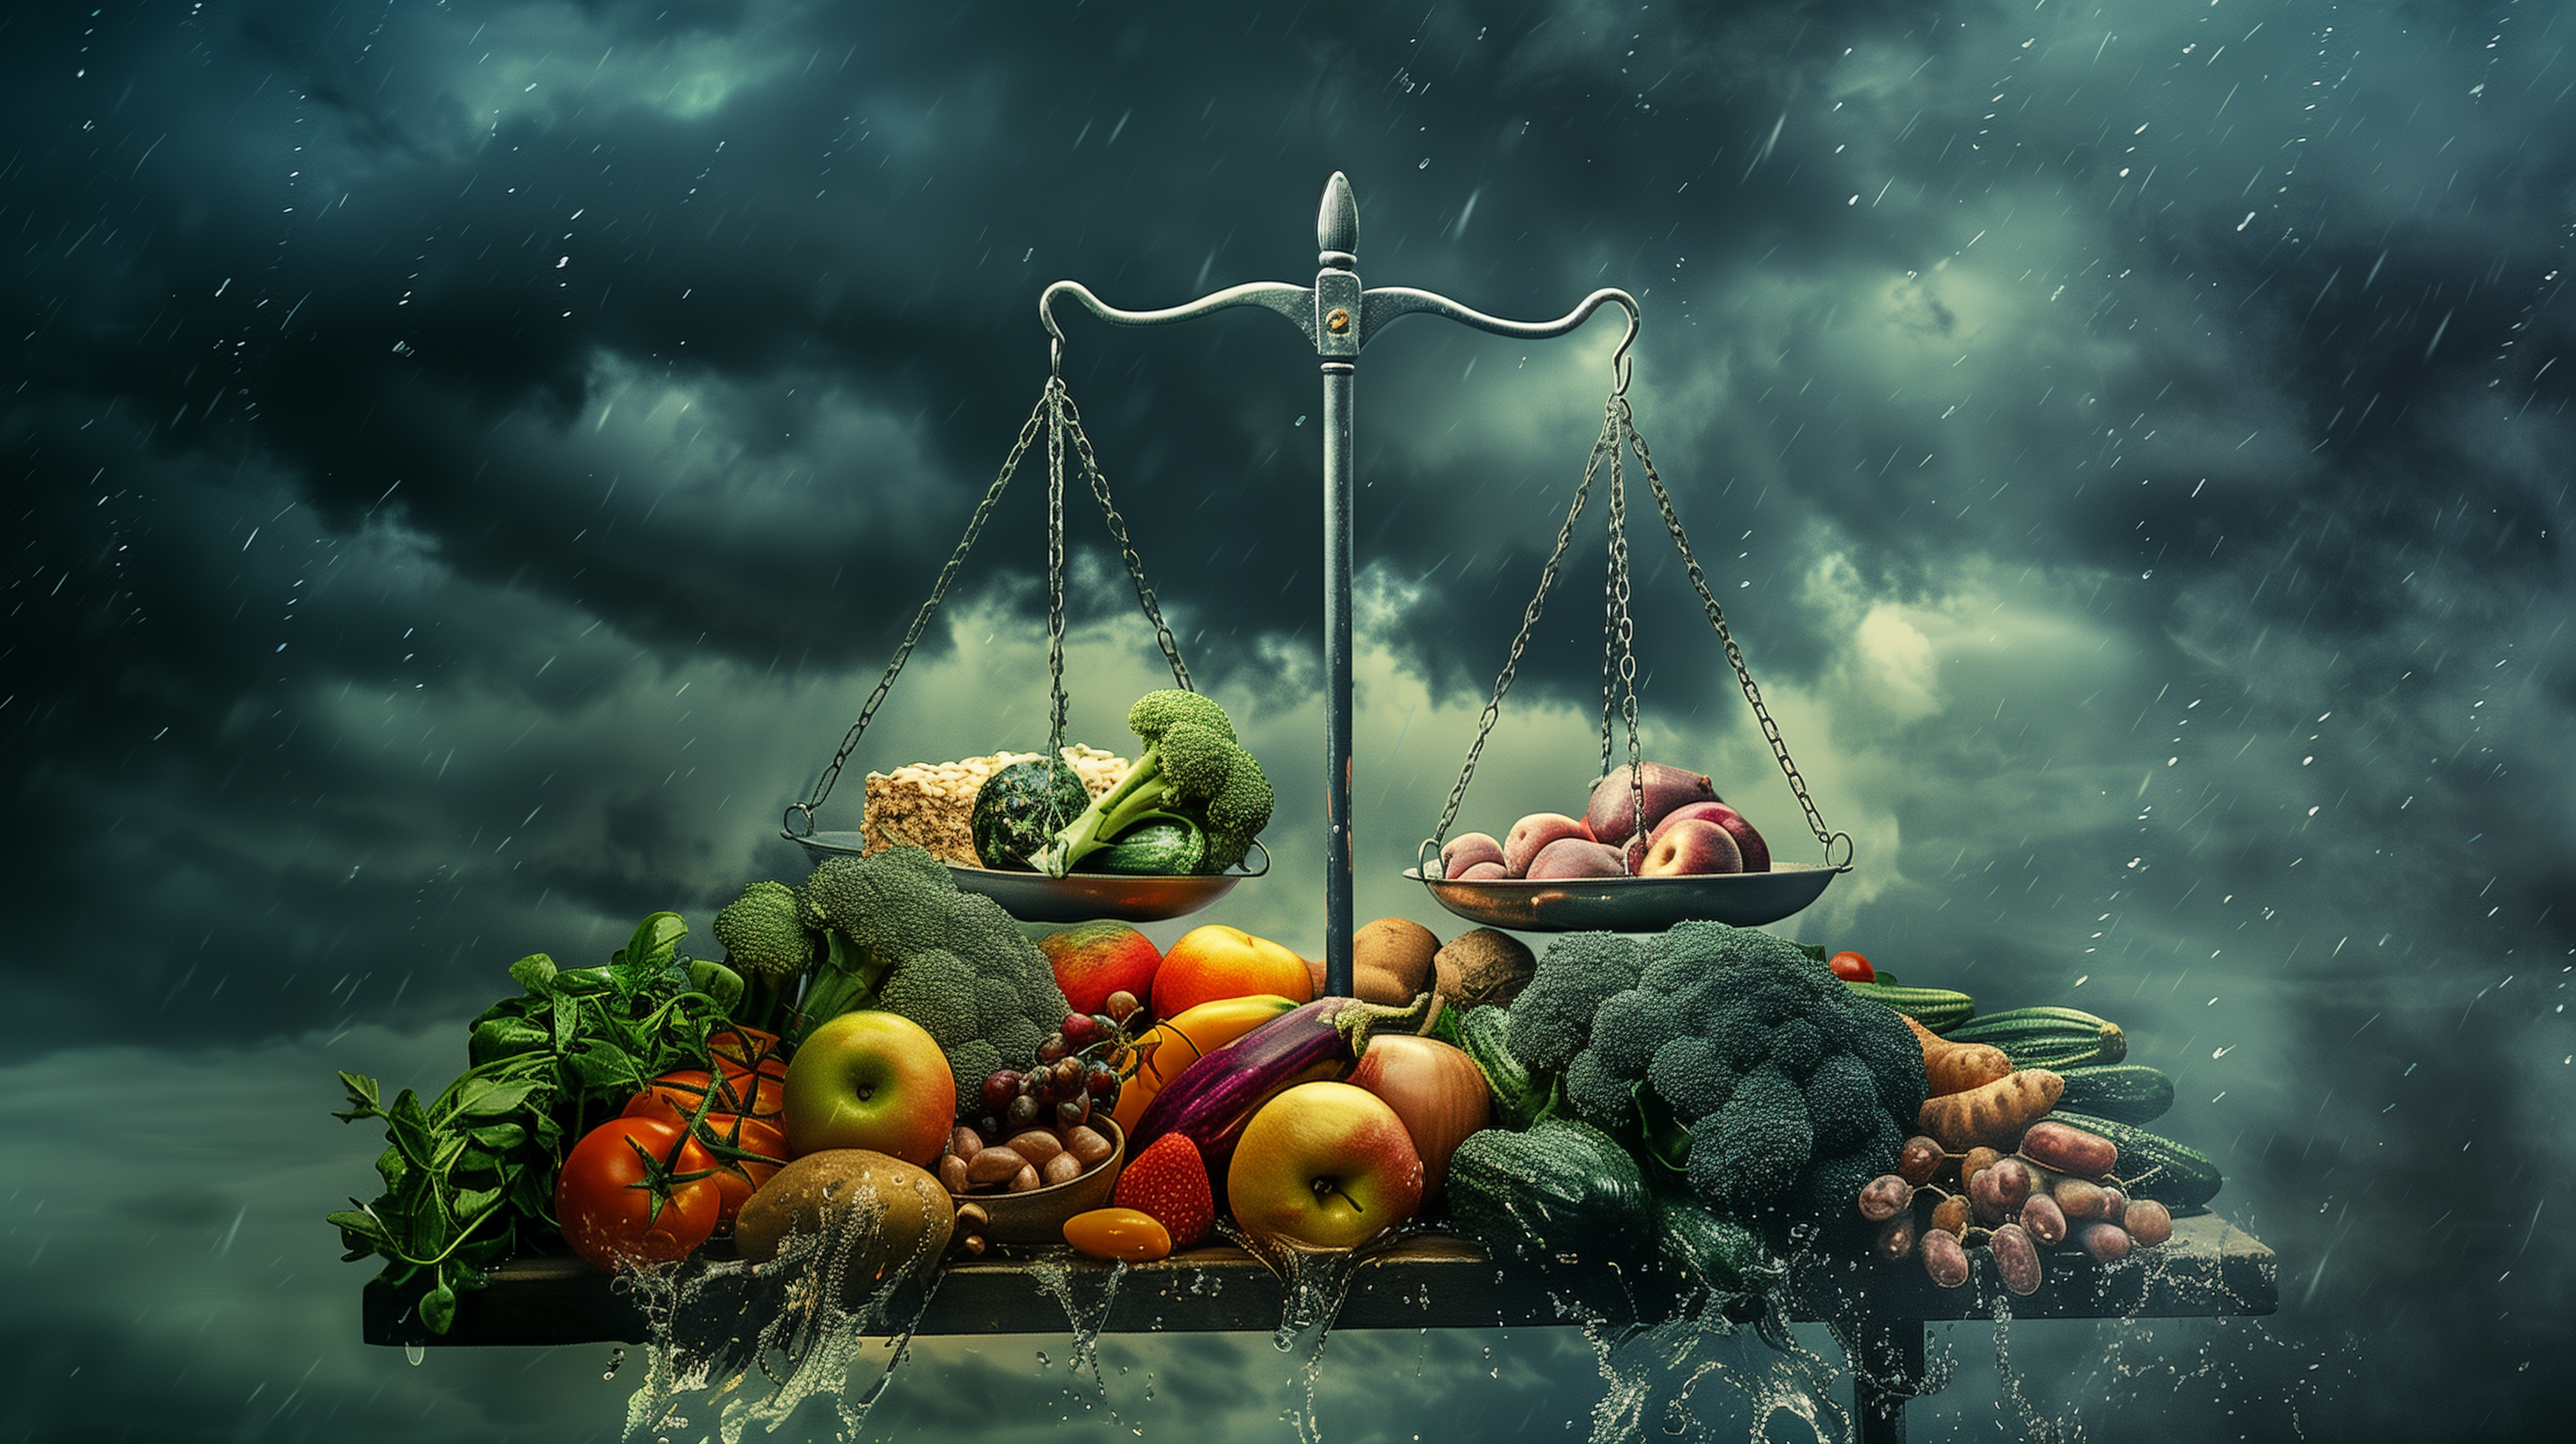 a balance scale, one side holding vibrant fruits and vegetables, the other side weighed down by dull, processed gluten-free products, with subtle storm clouds